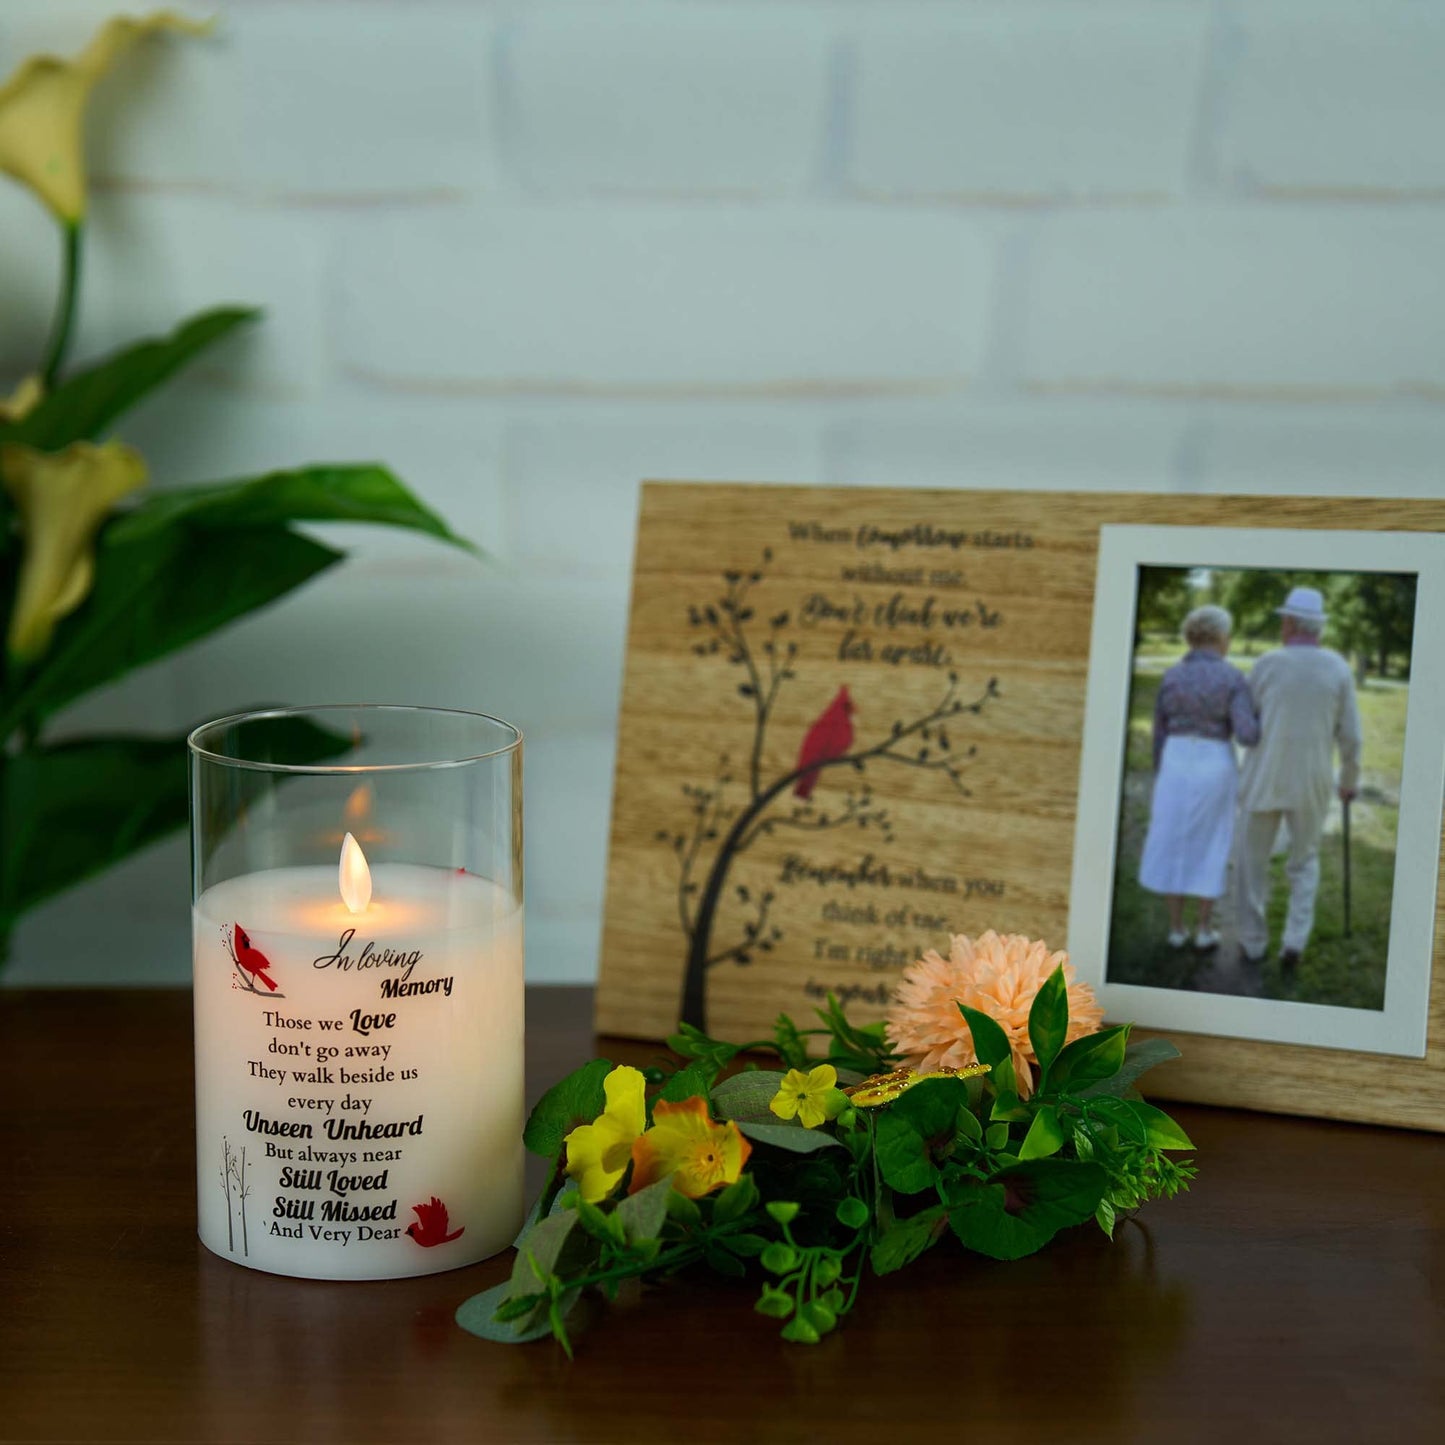 Flameless Memorial Candle, Flickering LED Light with Timer Sympathy Gift Bereavement Gifts for Loss of Loved One Memorial Gifts for Loss of Mother Loss of Father Remembrance Gifts (6" x 4")